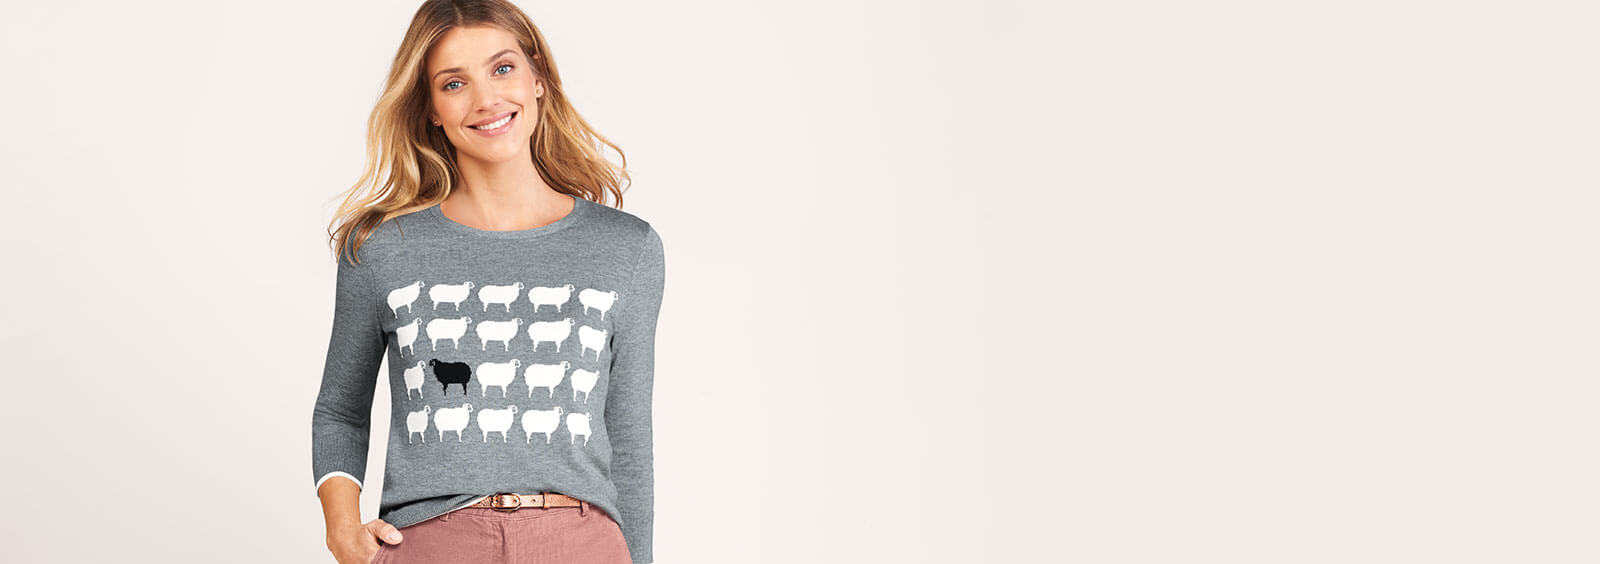 Every Lands' End Sweater Tells a Story